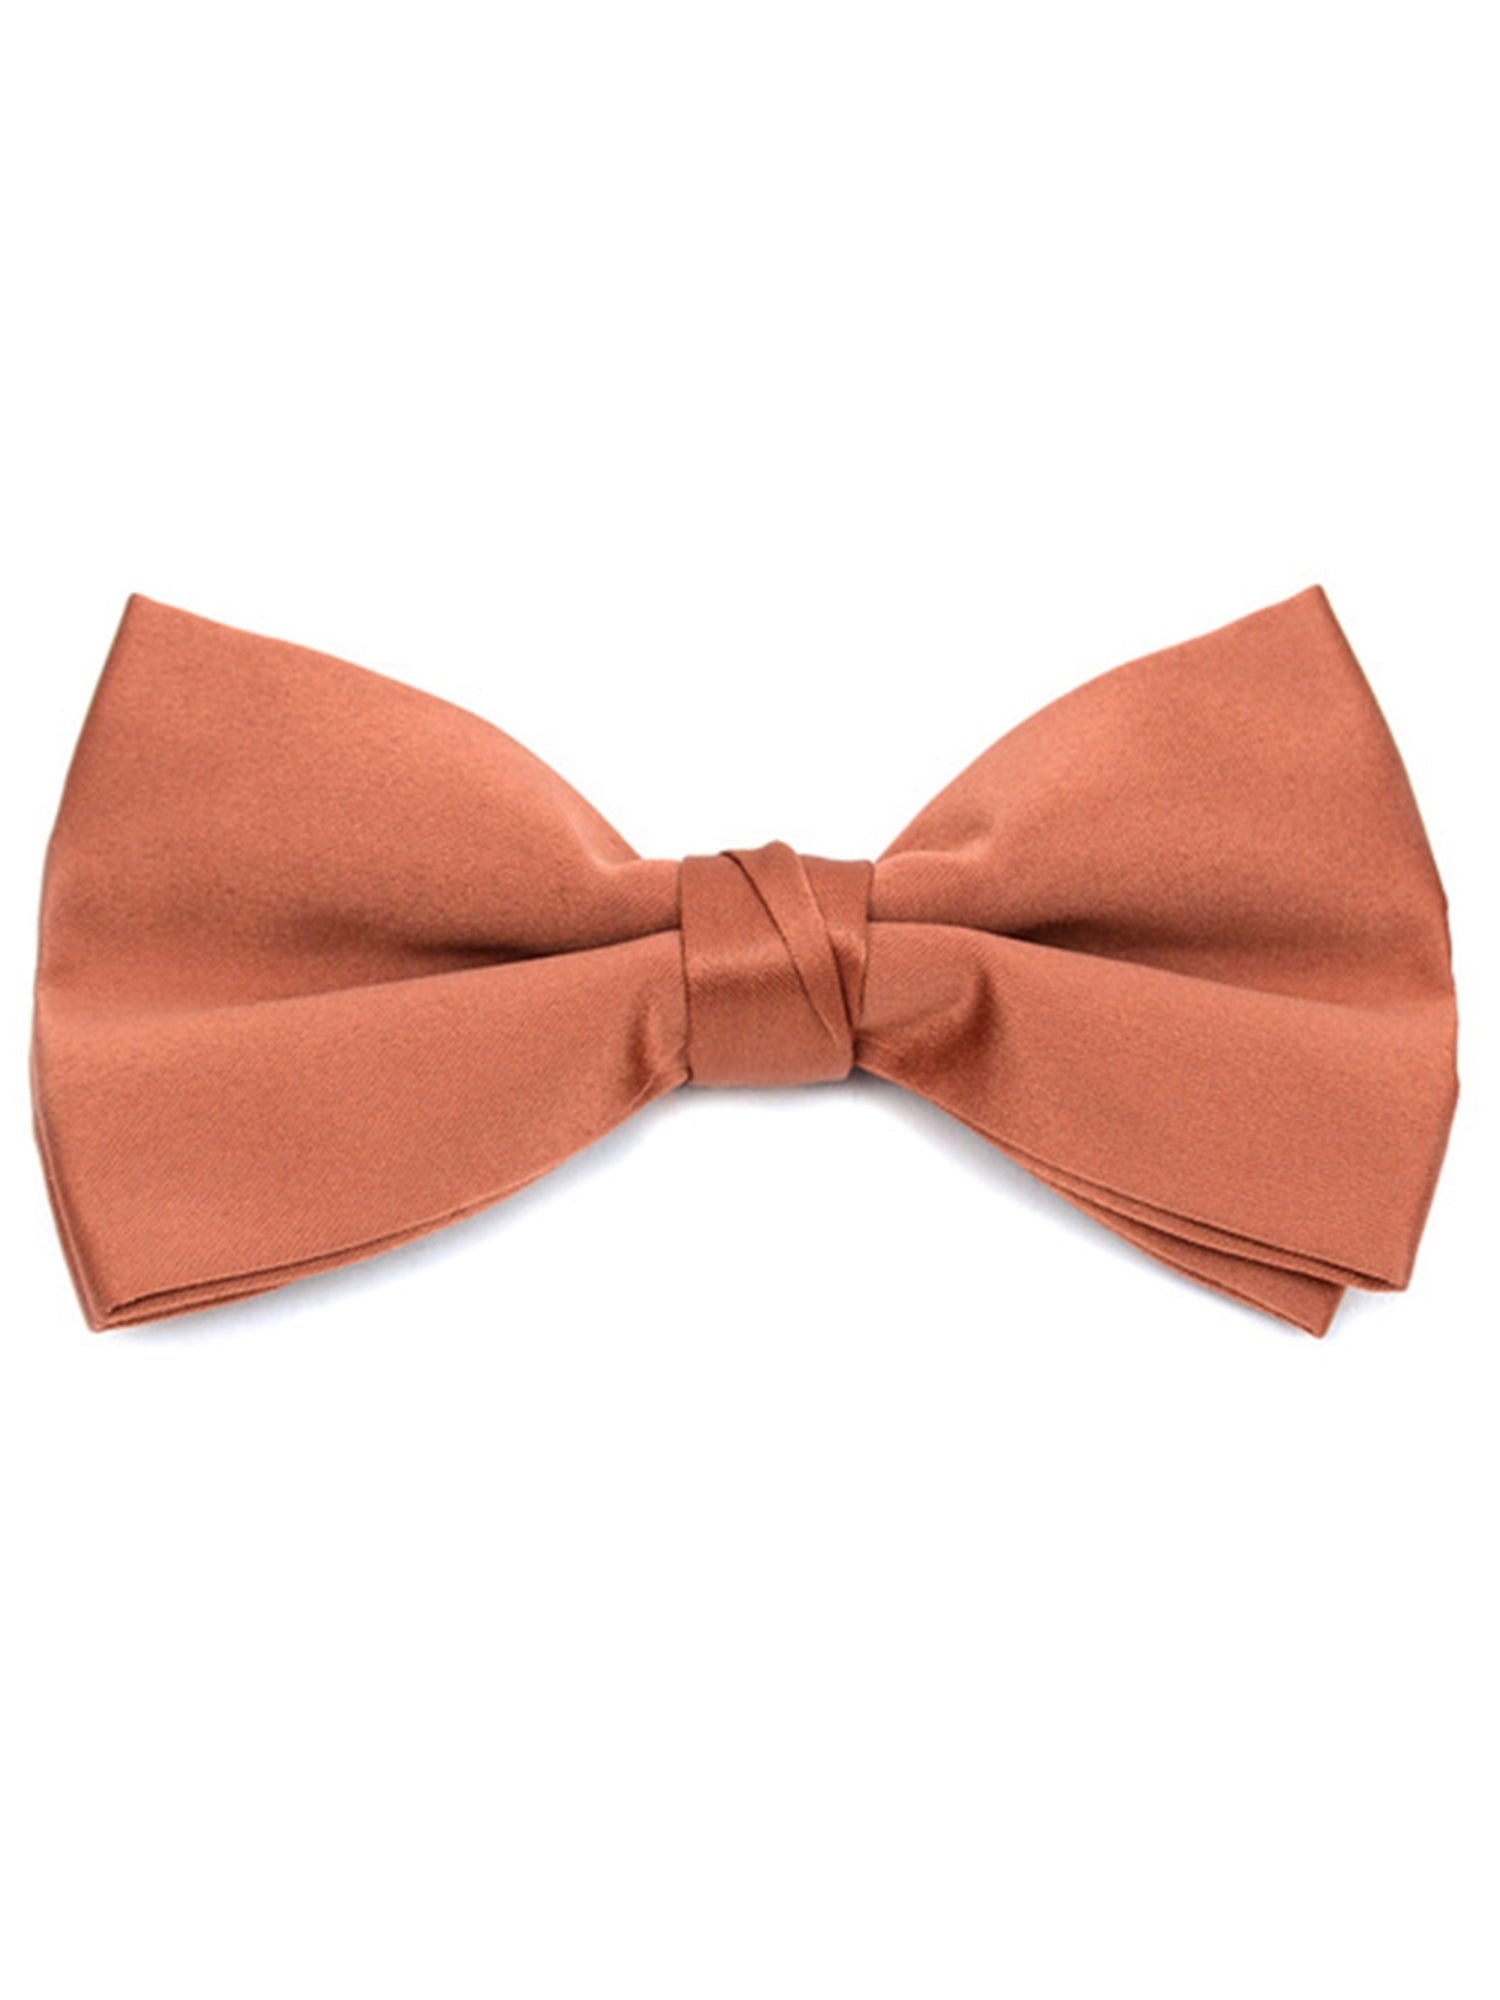 Young Boy's Pre-tied Adjustable Length Bow Tie - Formal Tuxedo Solid Color Boy's Solid Color Bow Tie TheDapperTie Rust One Size 